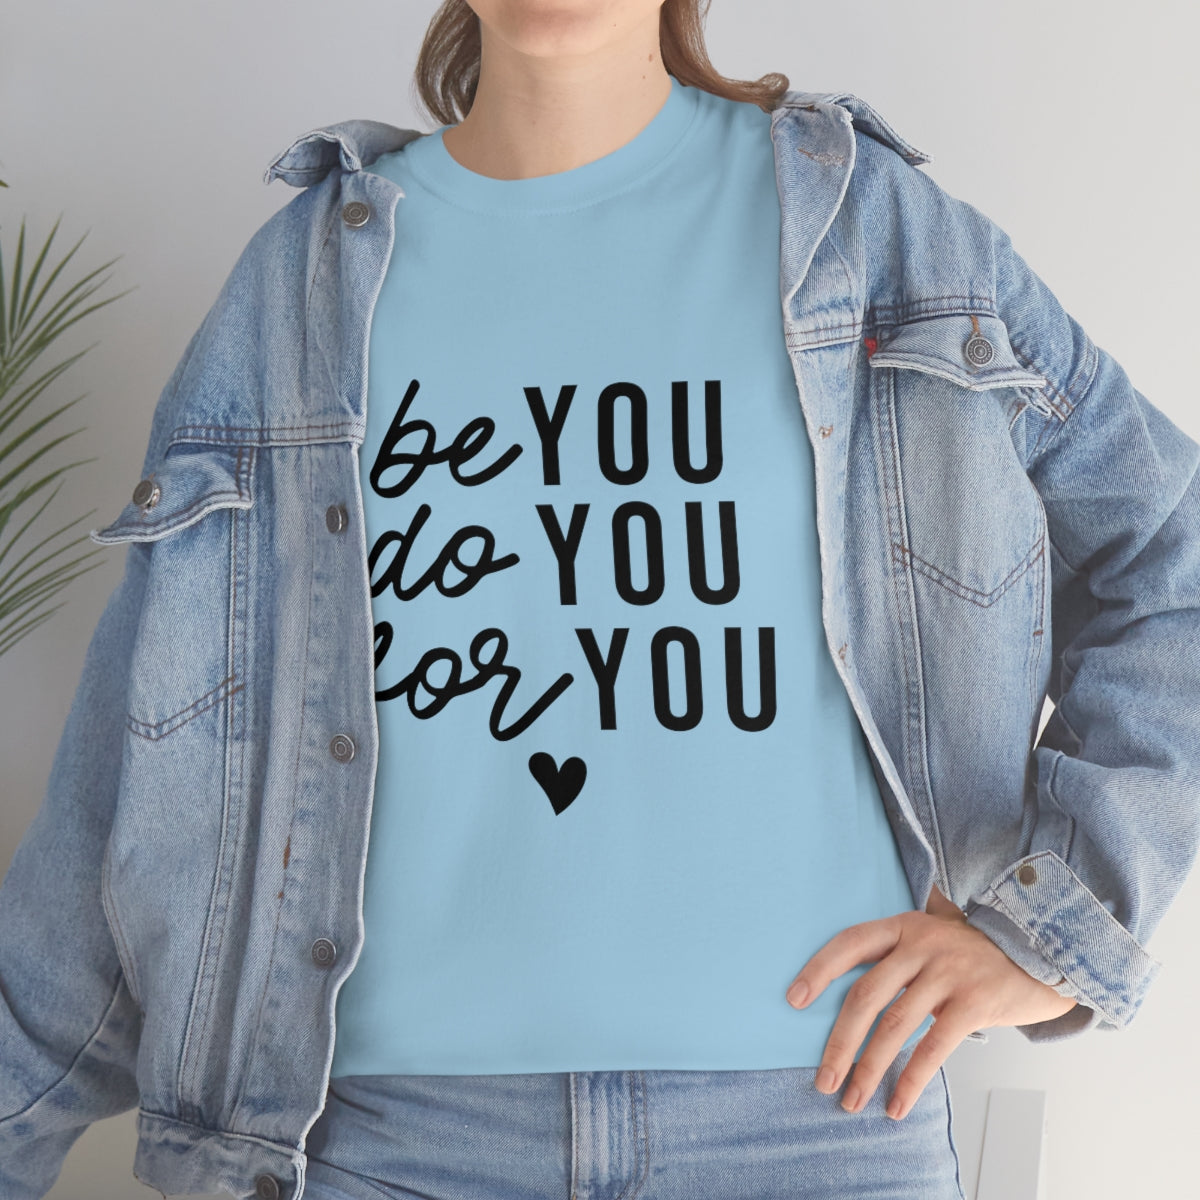 Be you Do you for you Unisex Heavy Cotton Tee